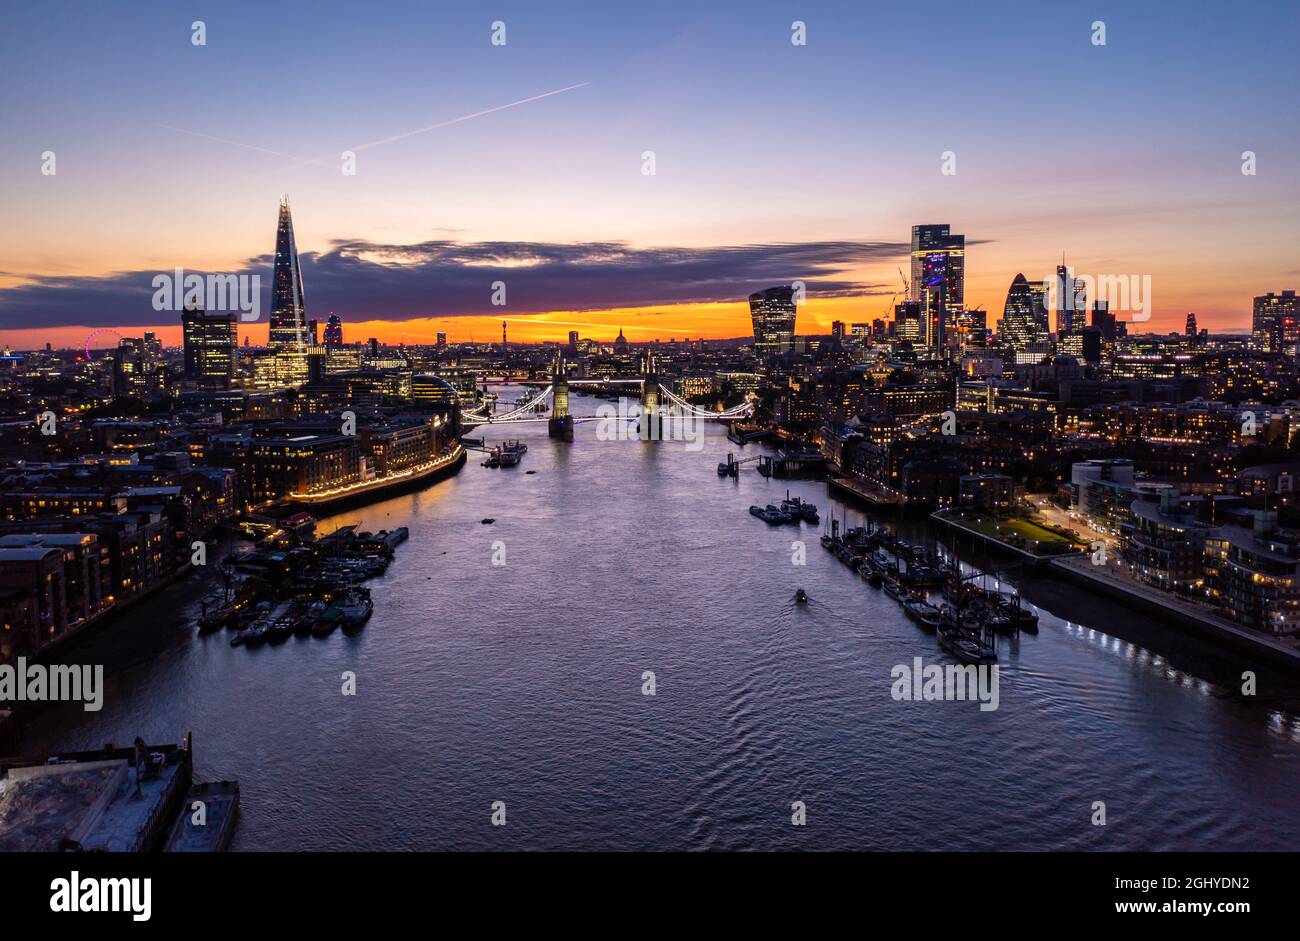 Aerial view of the famous Tower Bridge over ocean surrounded with buildings and skyscrapers under a cloudy twilight and dusk orange morning sky Stock Photo